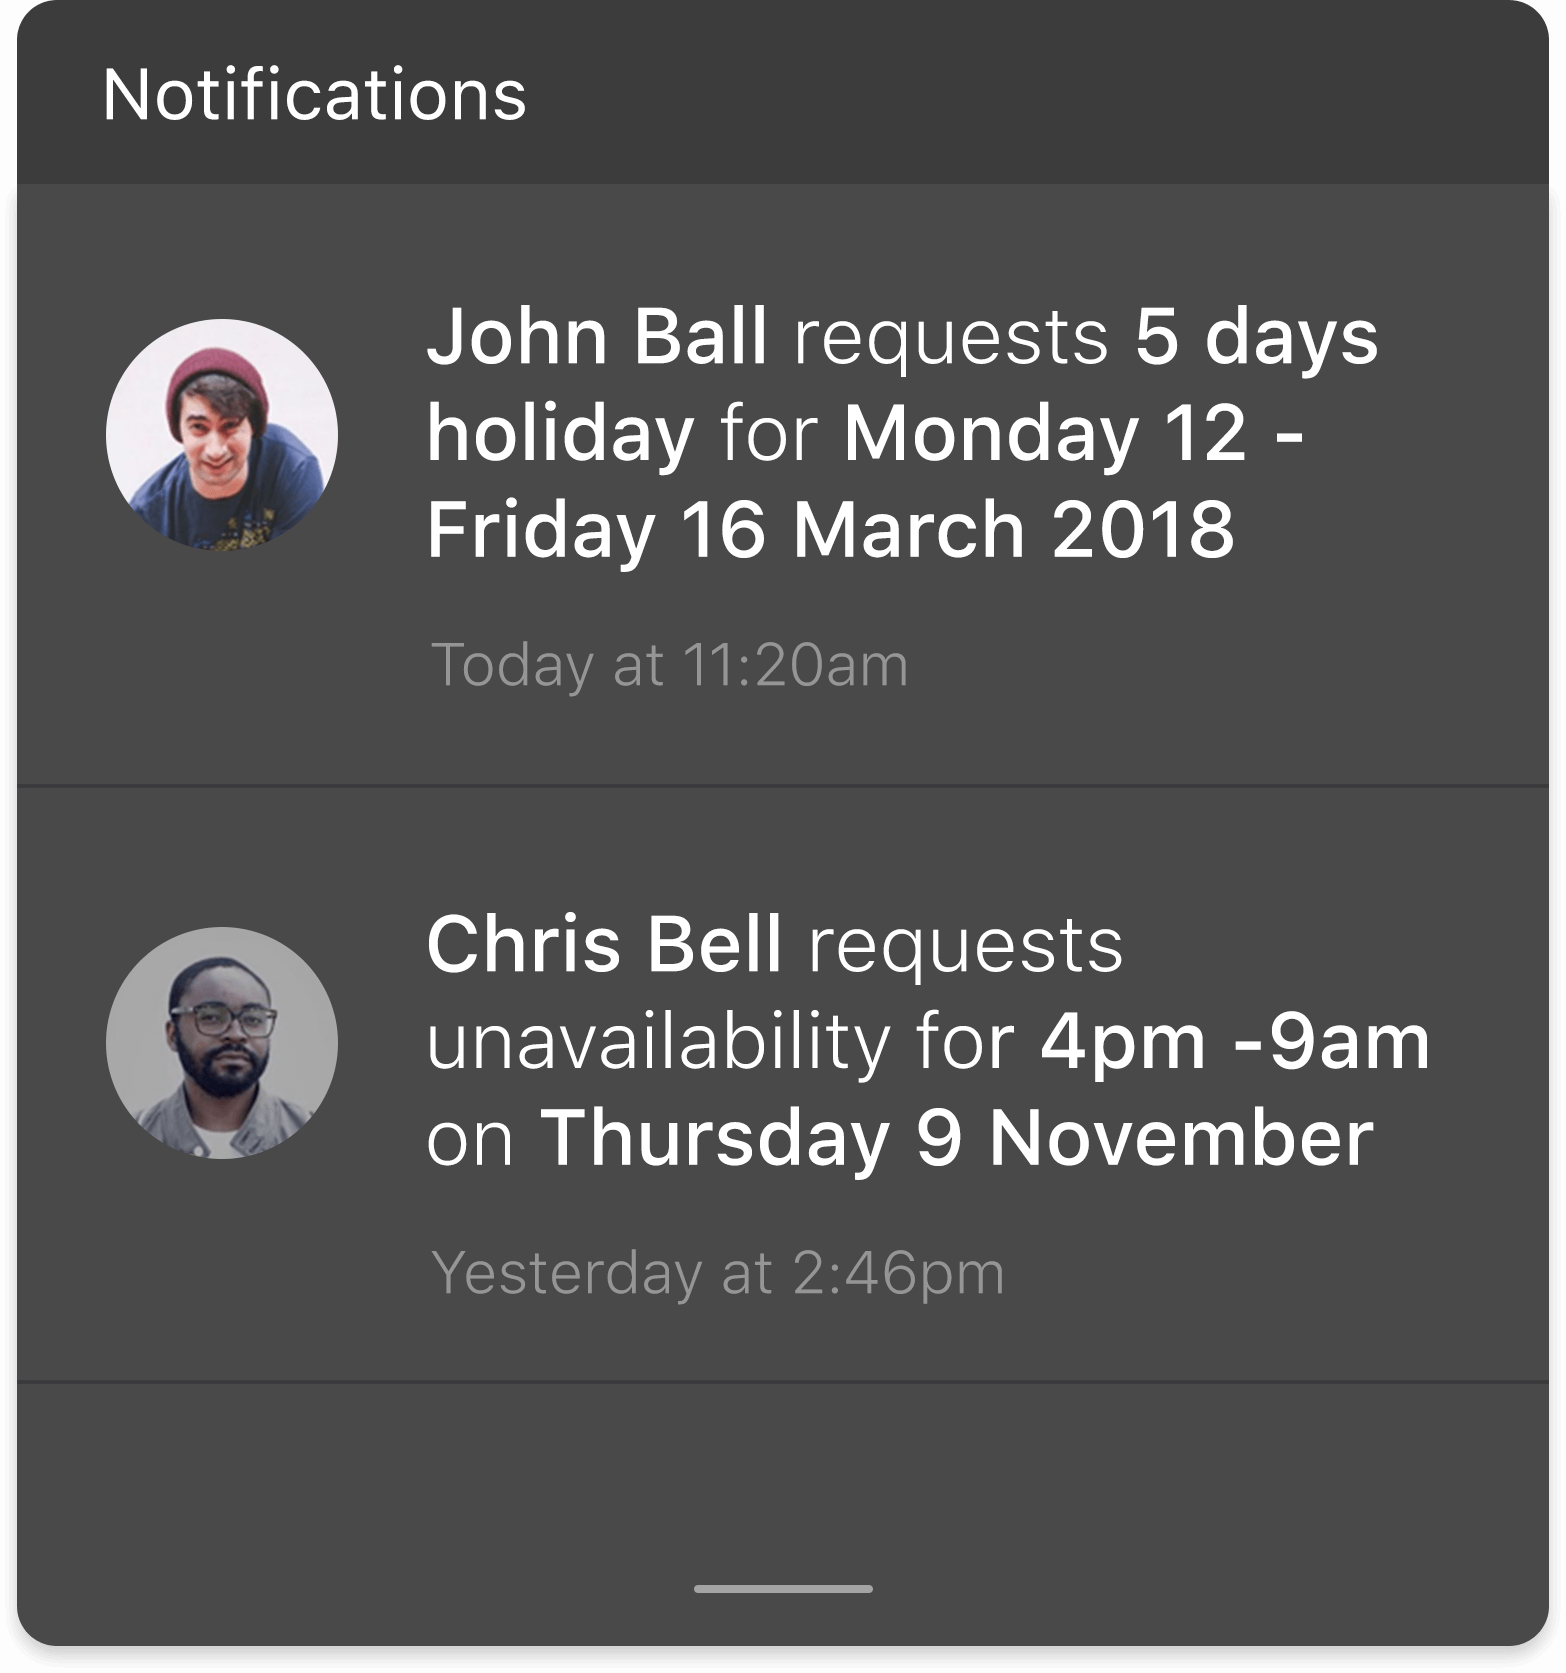 RotaCloud Software - Managers received notifications when employees make shift change or time off requests